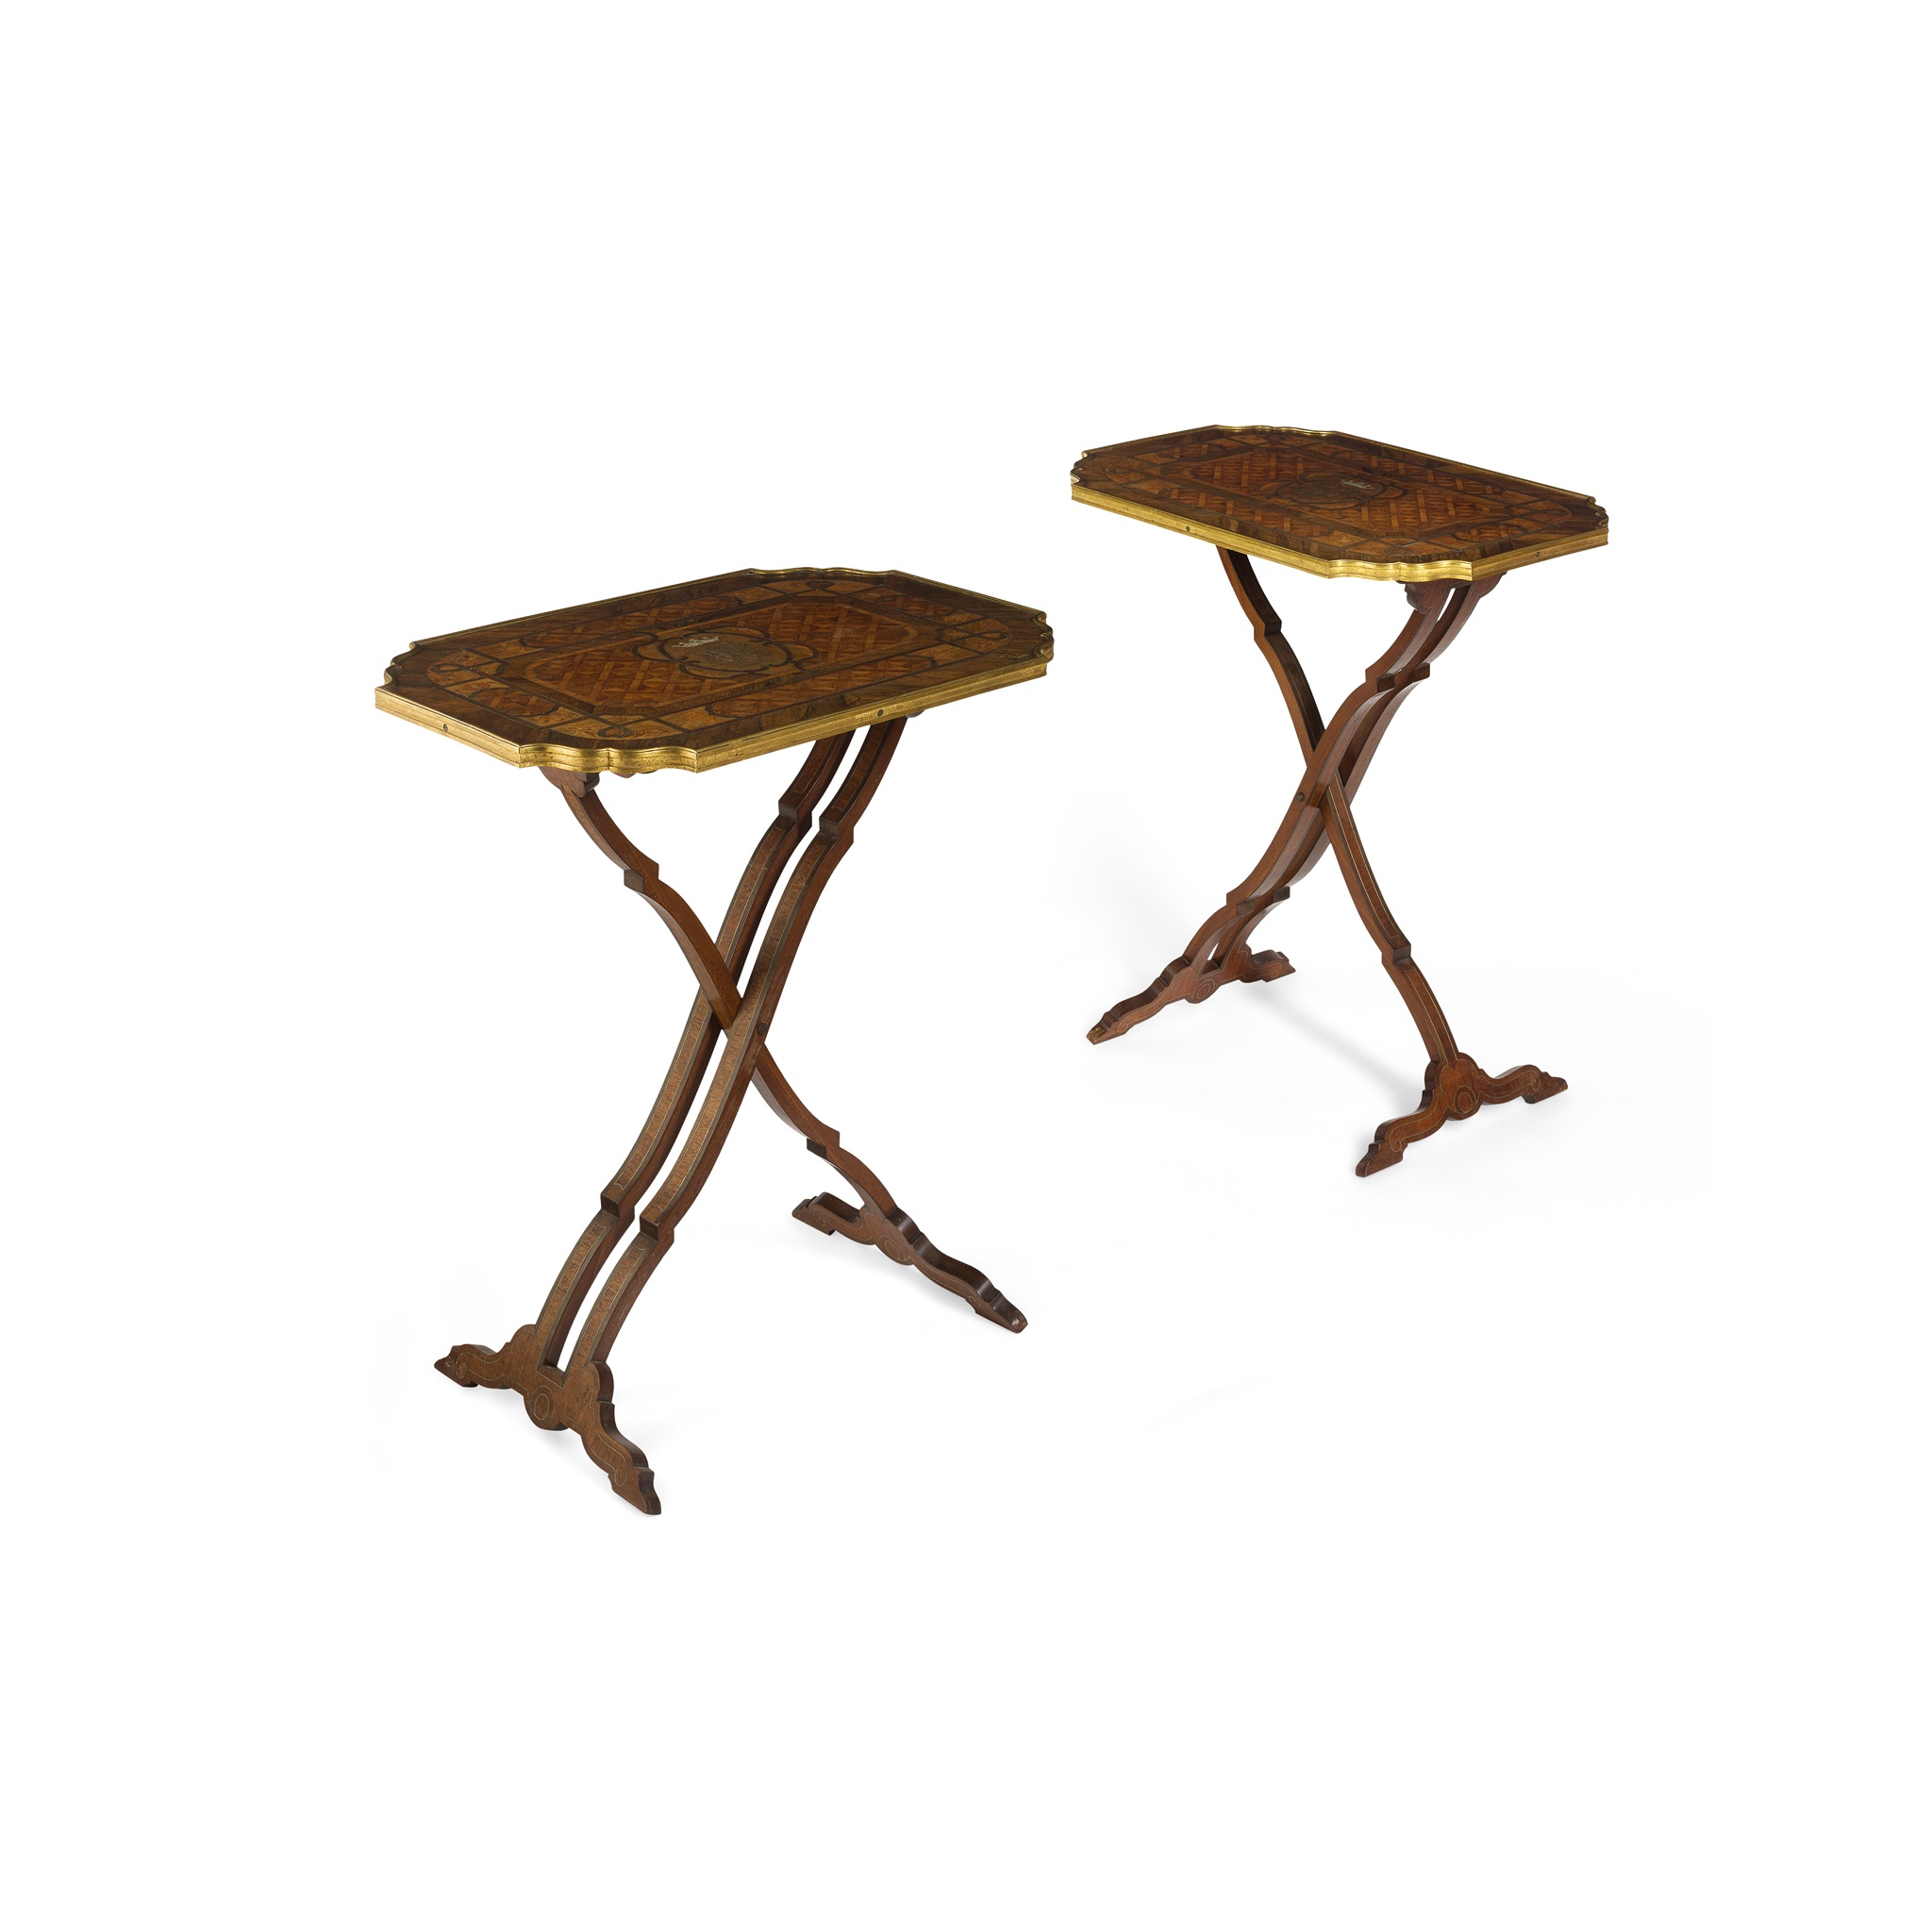 PAIR OF ROSEWOOD MARQUETRY, MOTHER-OF-PEARL, SILVER METAL, AND BRASS BANDED OCCASIONAL TABLES CIRCA